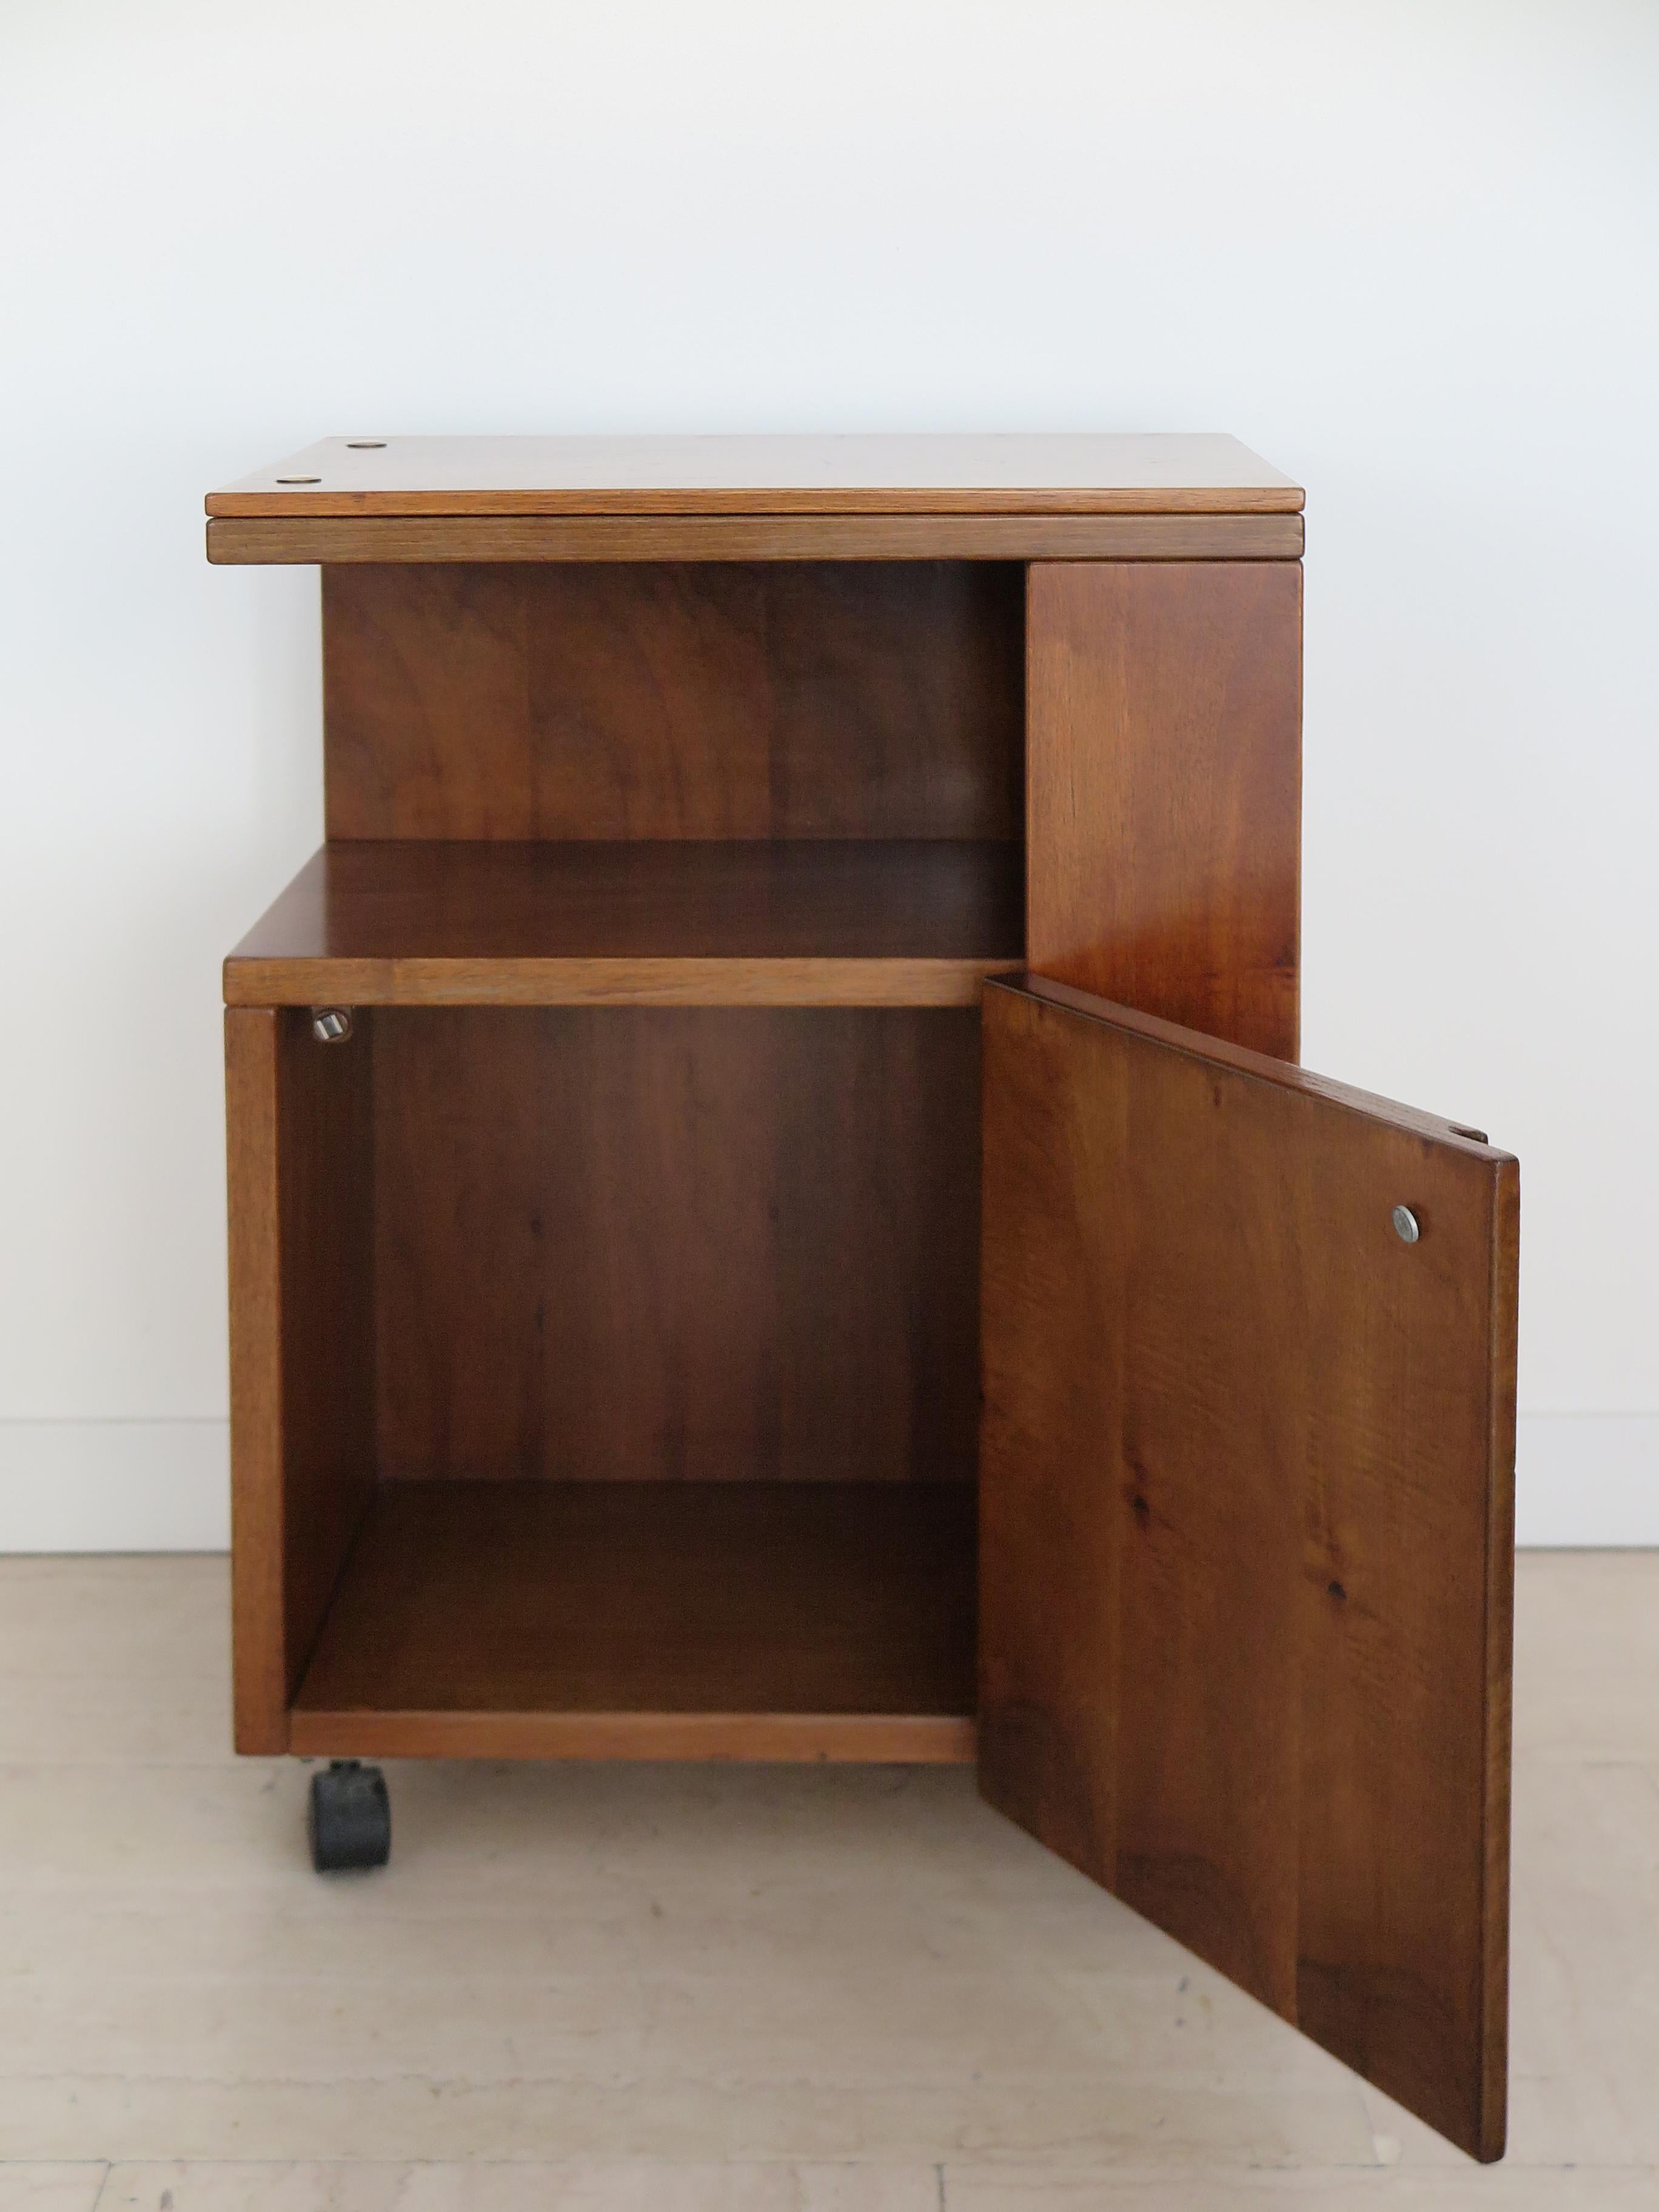 Giovanni Michelucci Poltronova Italian Wood Bedside Tables Nithg Stands 1960s For Sale 1